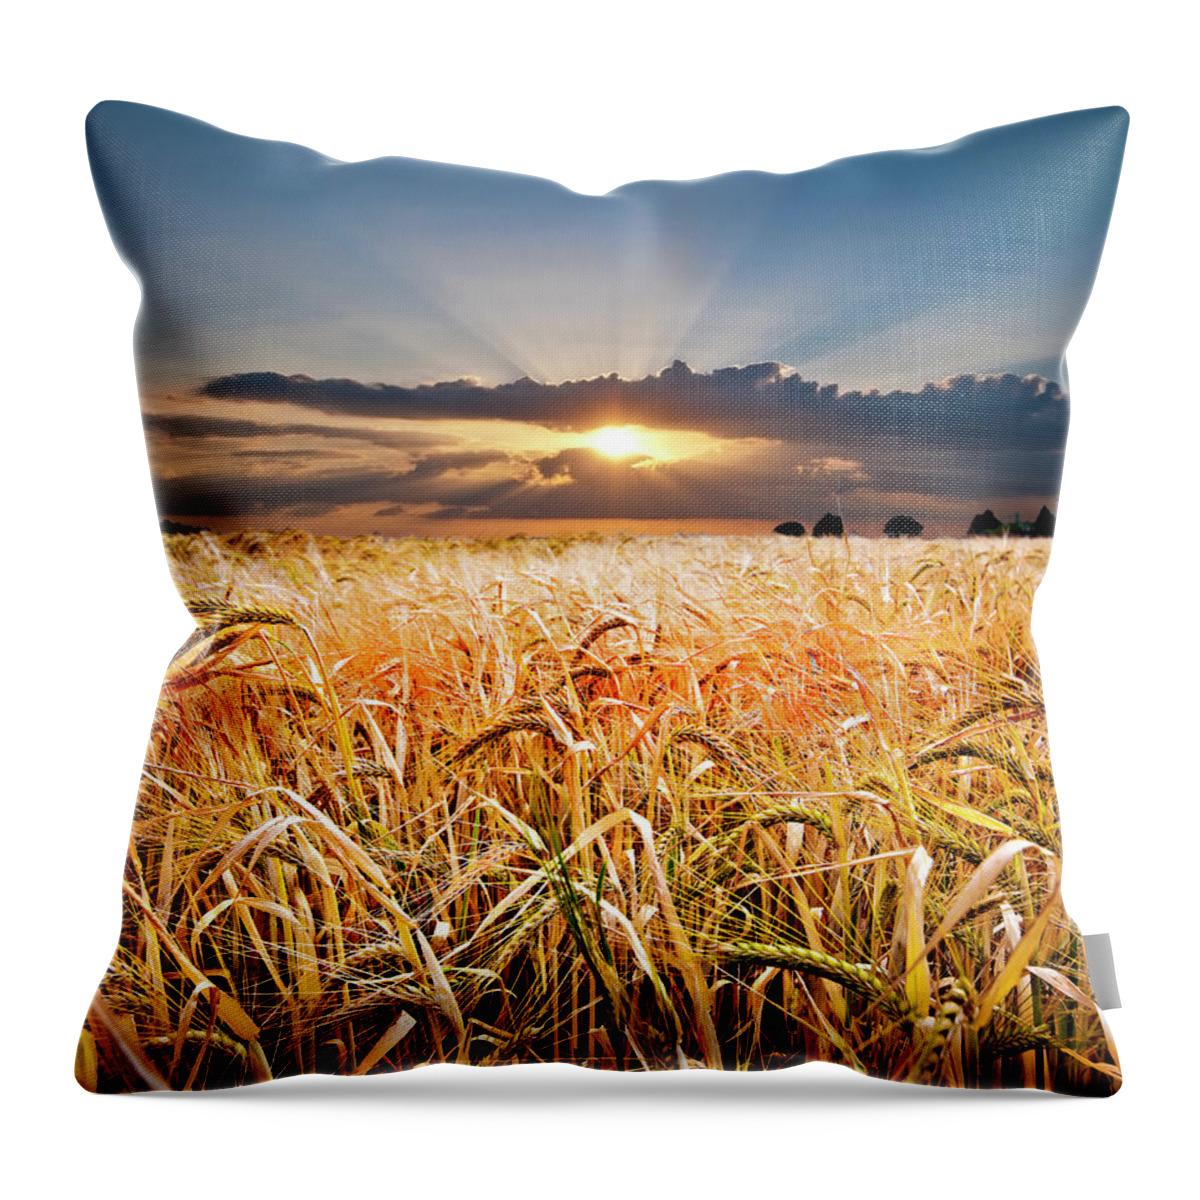 Wheat Throw Pillow featuring the photograph Wheat At Sunset by Meirion Matthias